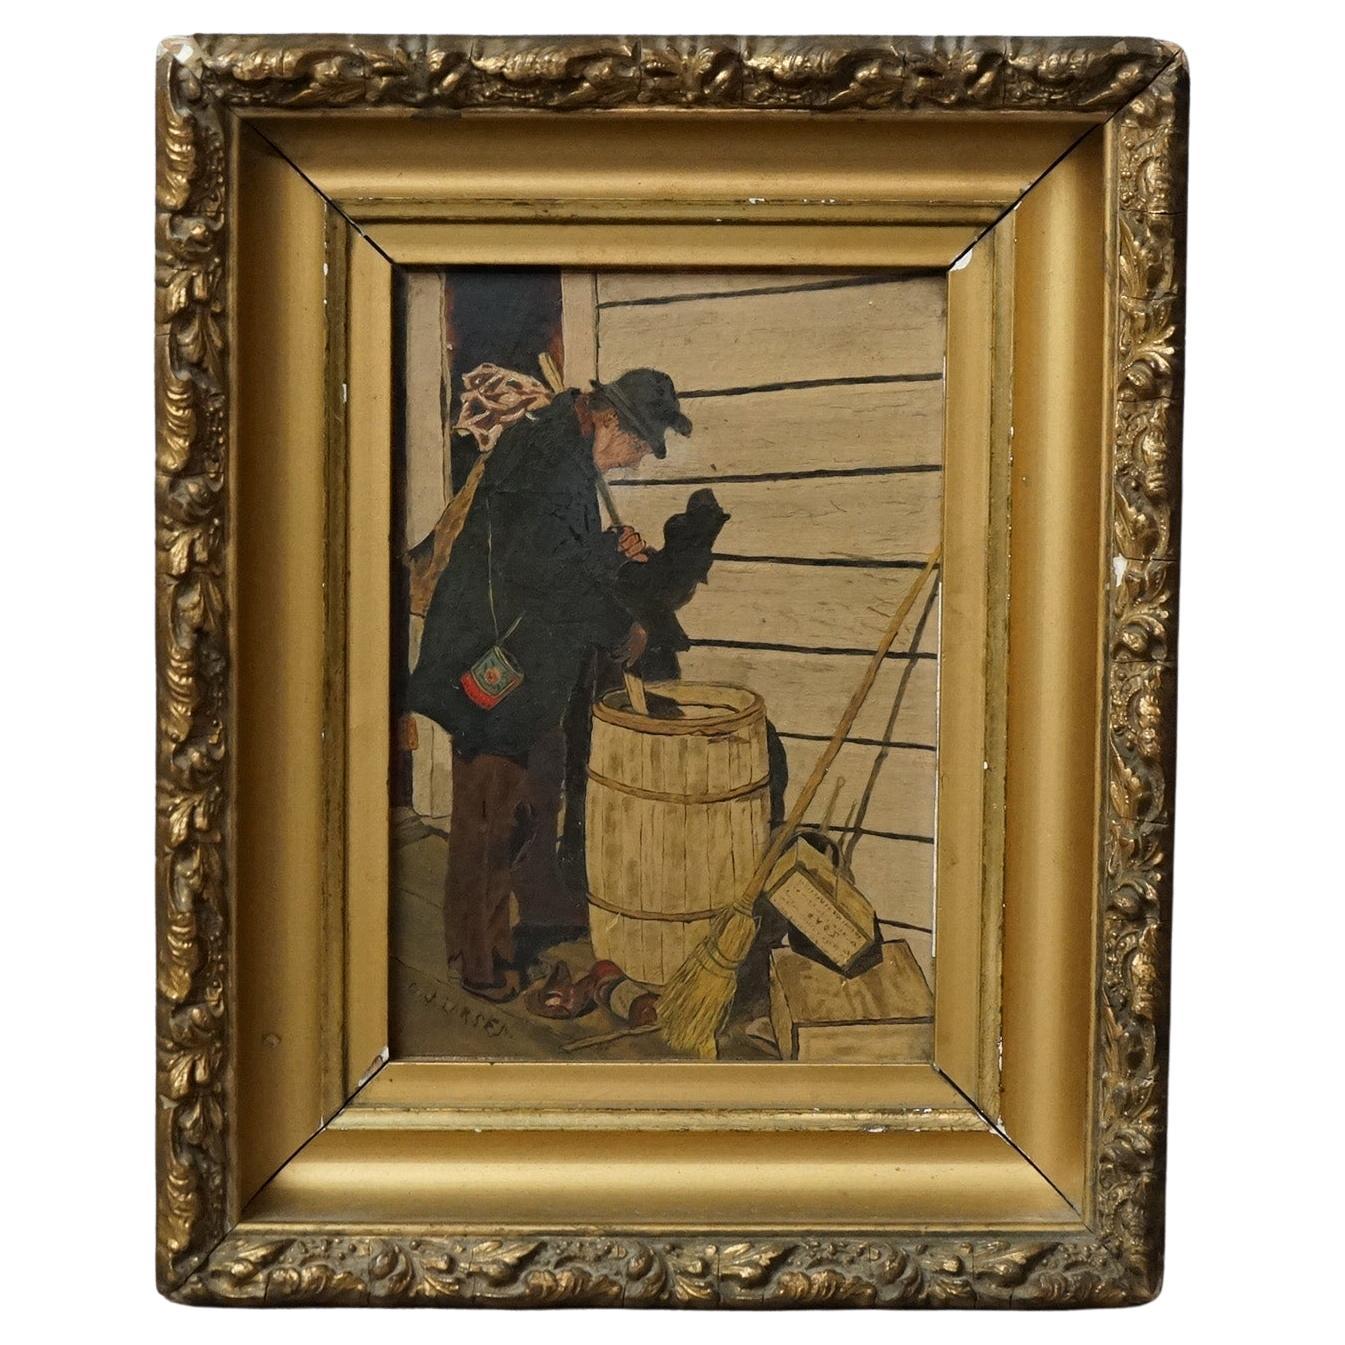 Antique Oil on Panel Painting of a Street Urchin Hobo Signed C.J. Larsen C1900 For Sale